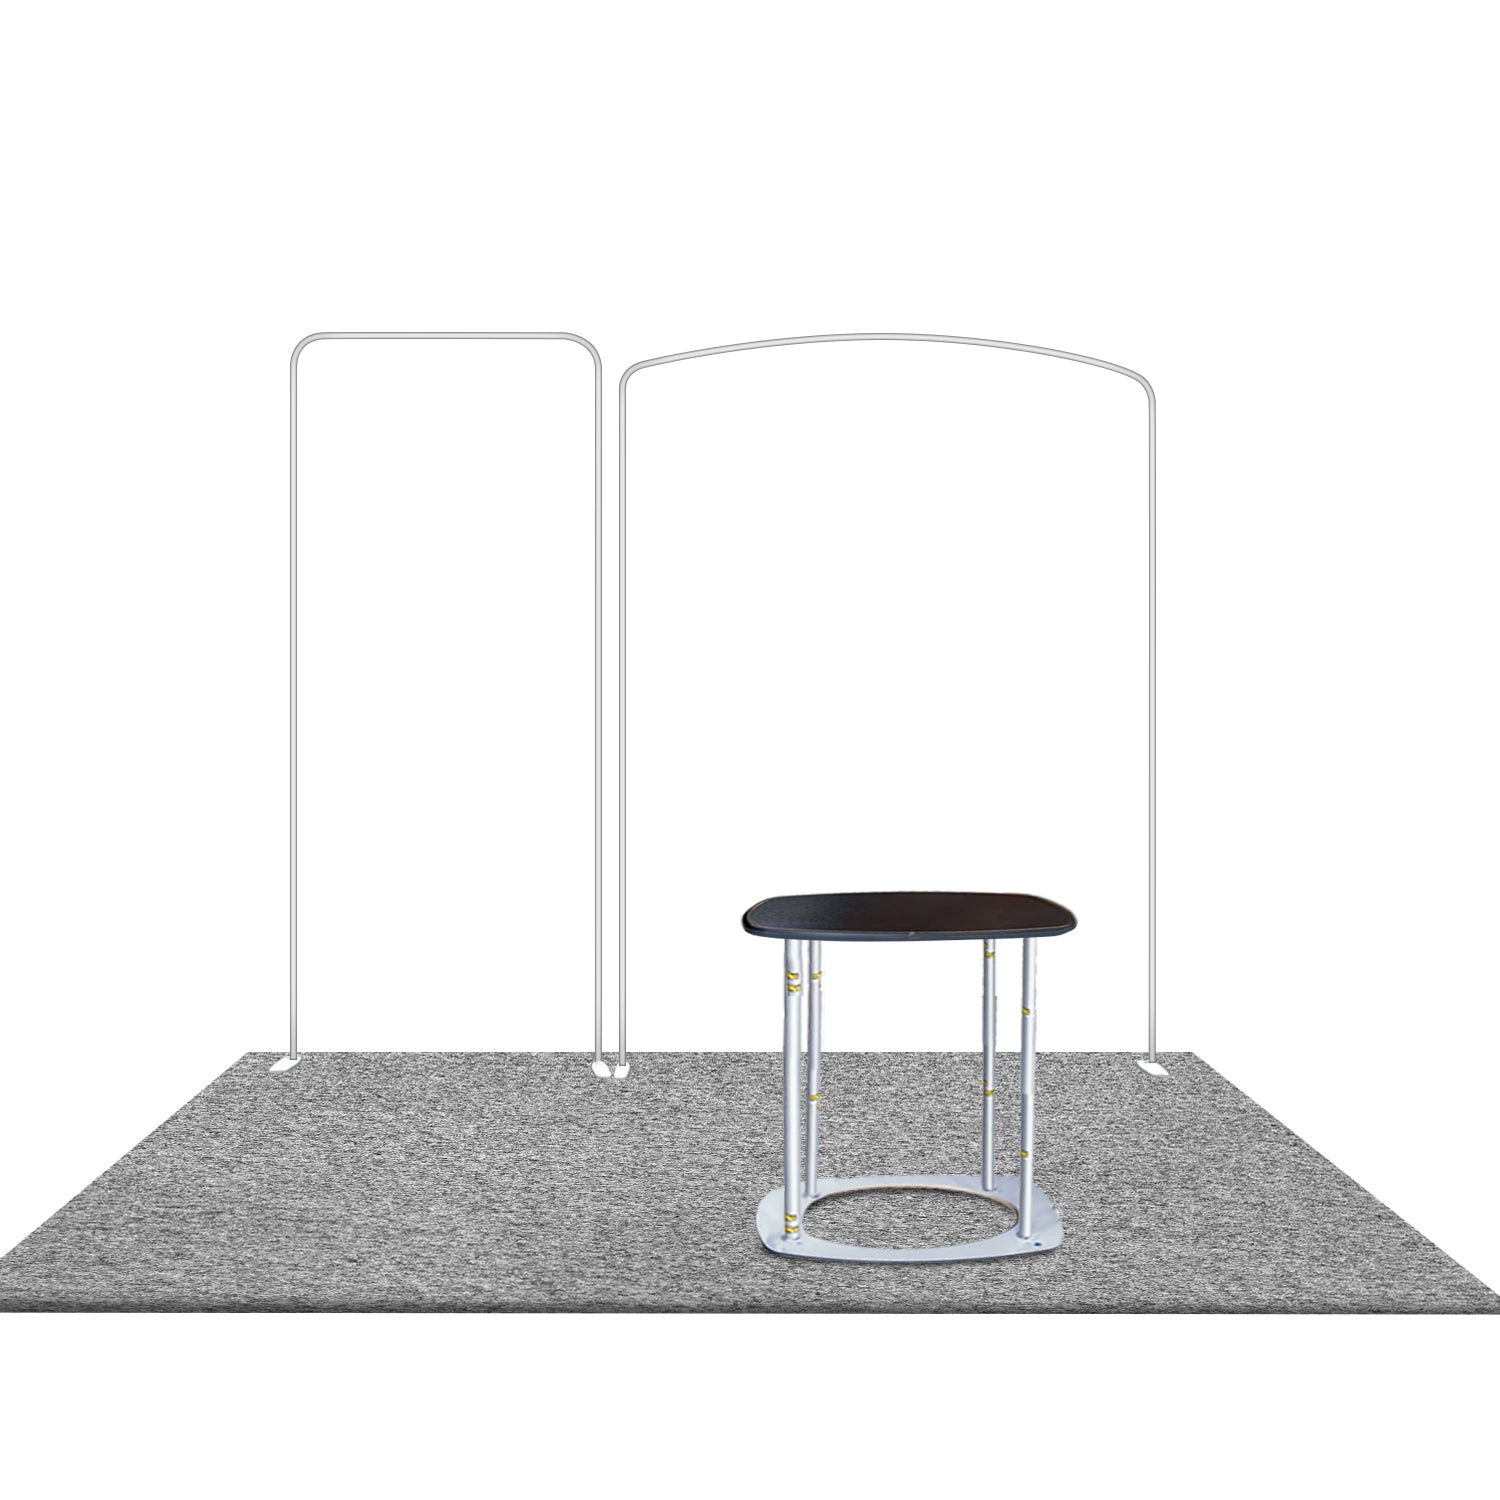 Modular Exhibition Kit for 3m Wide Booths